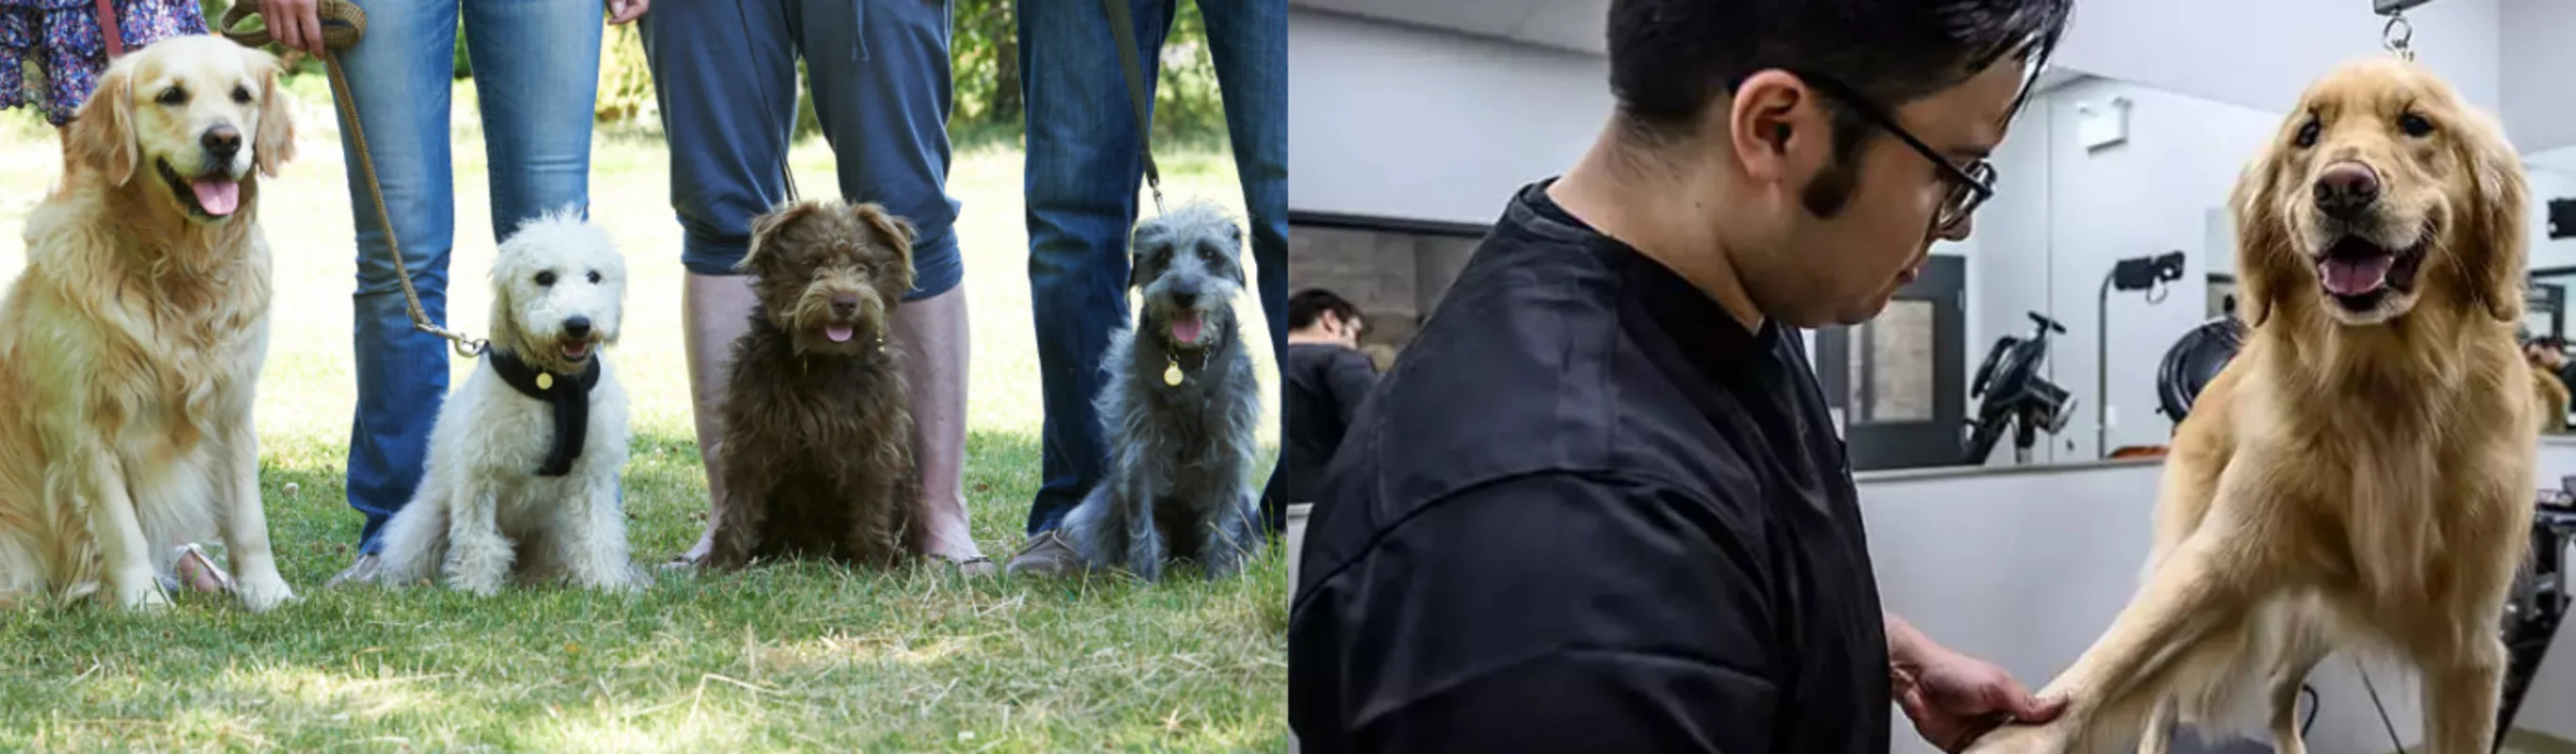 Two images-Left one is 4 dogs on leashes in a park and the right is a groomer trimming a dog's nails